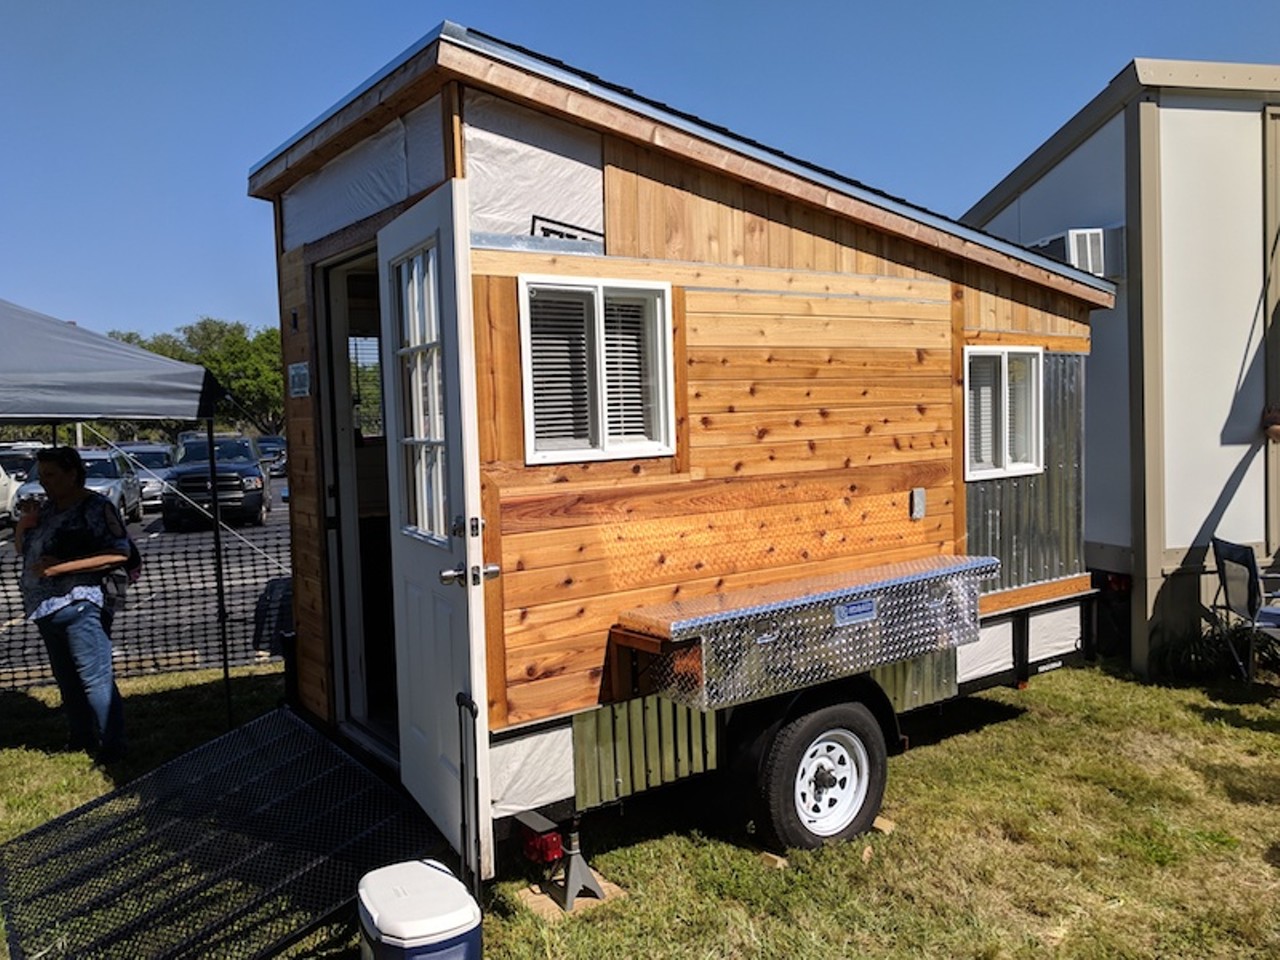 All the little houses we saw at St. Petersburg's Tiny Home Festival 2019